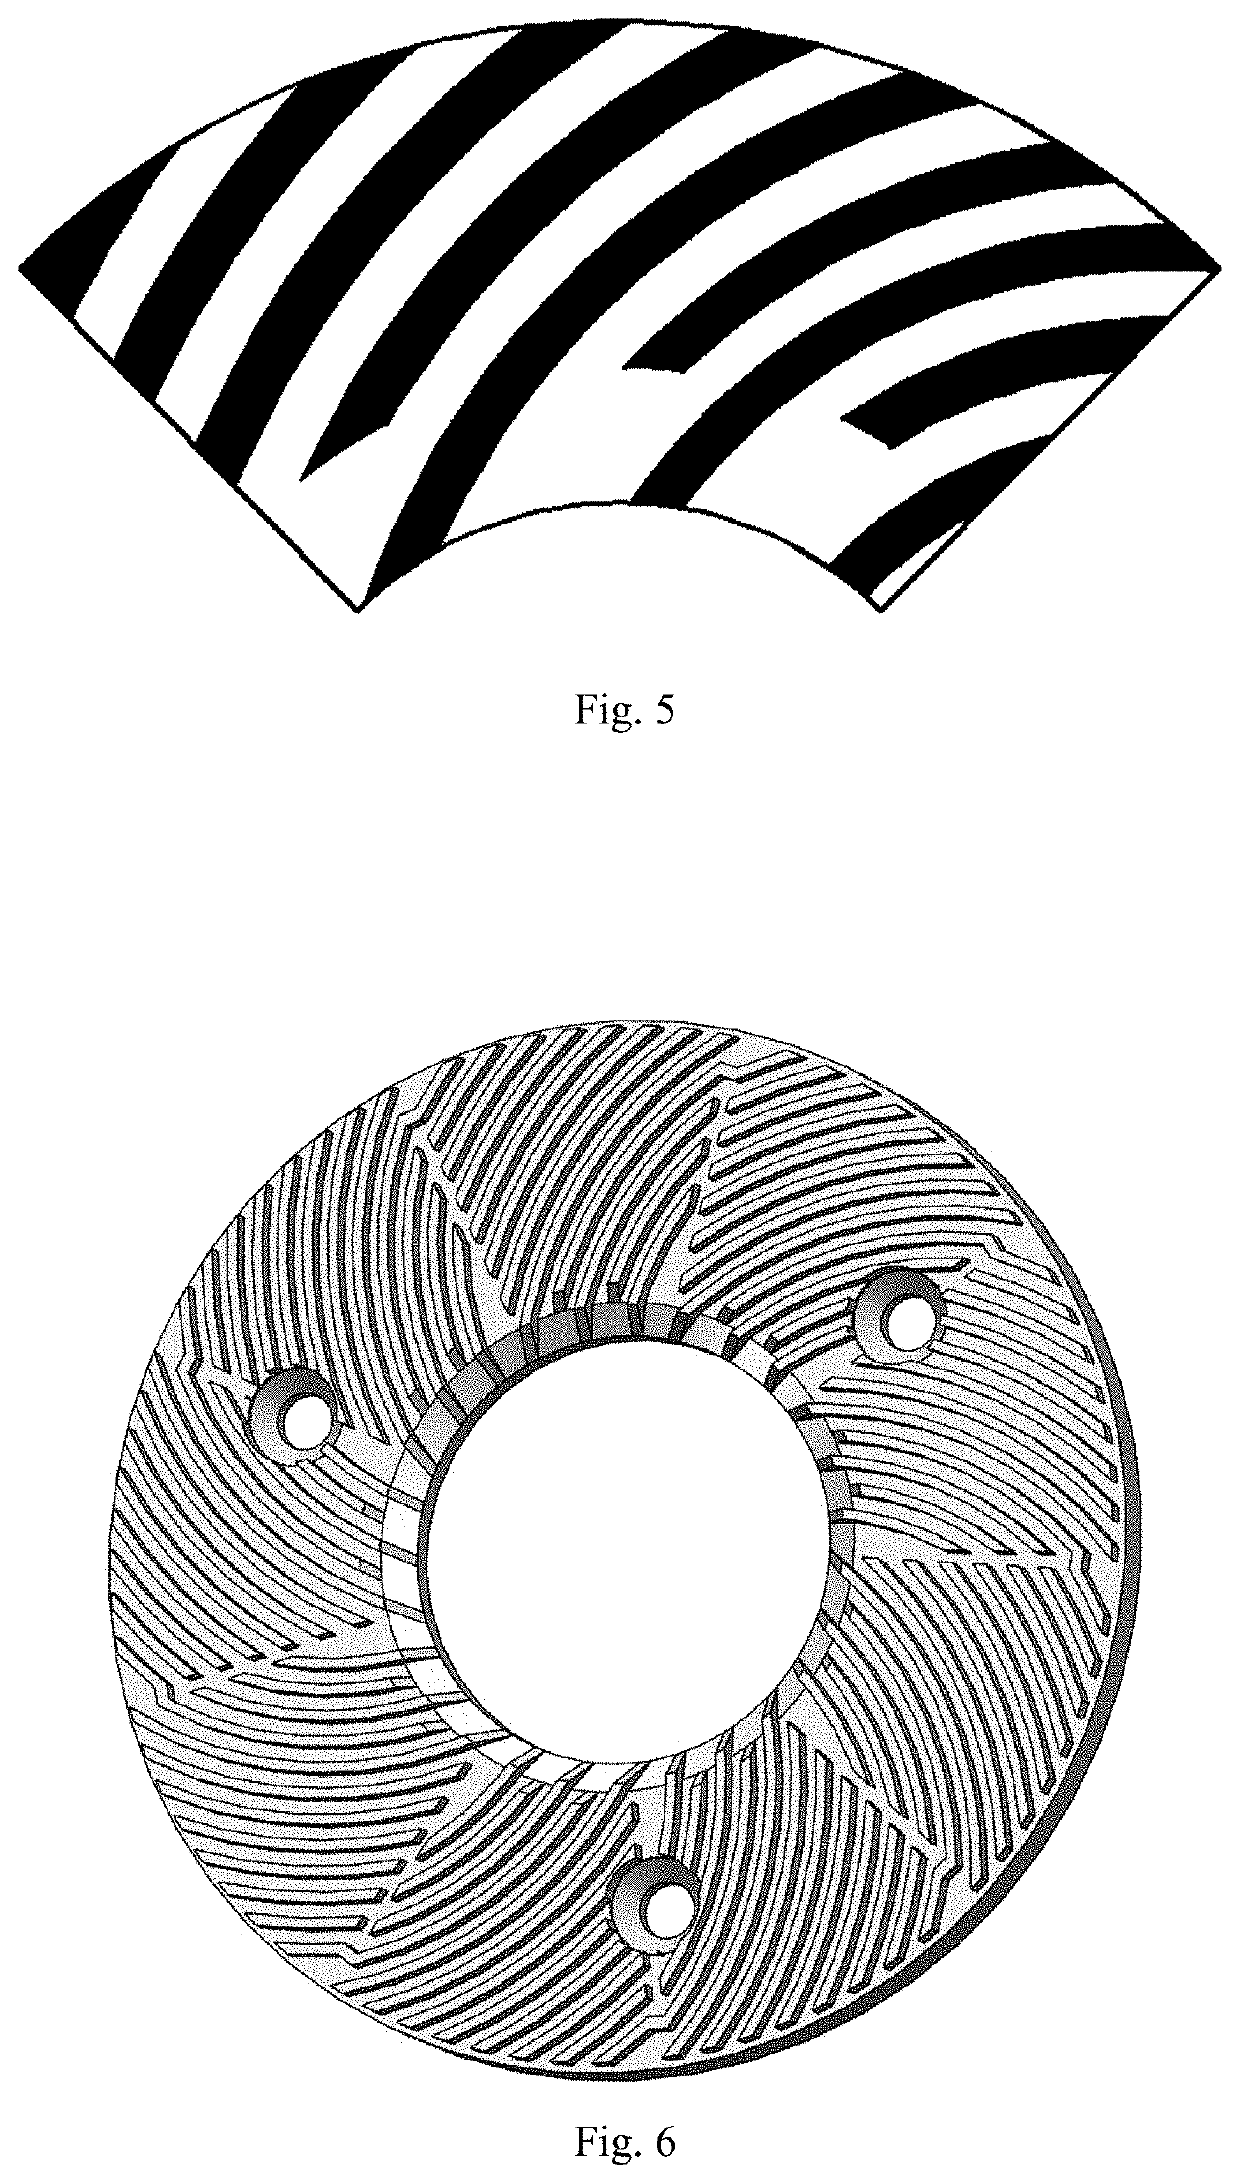 Method for designing refiner plates with equidistant curved bars